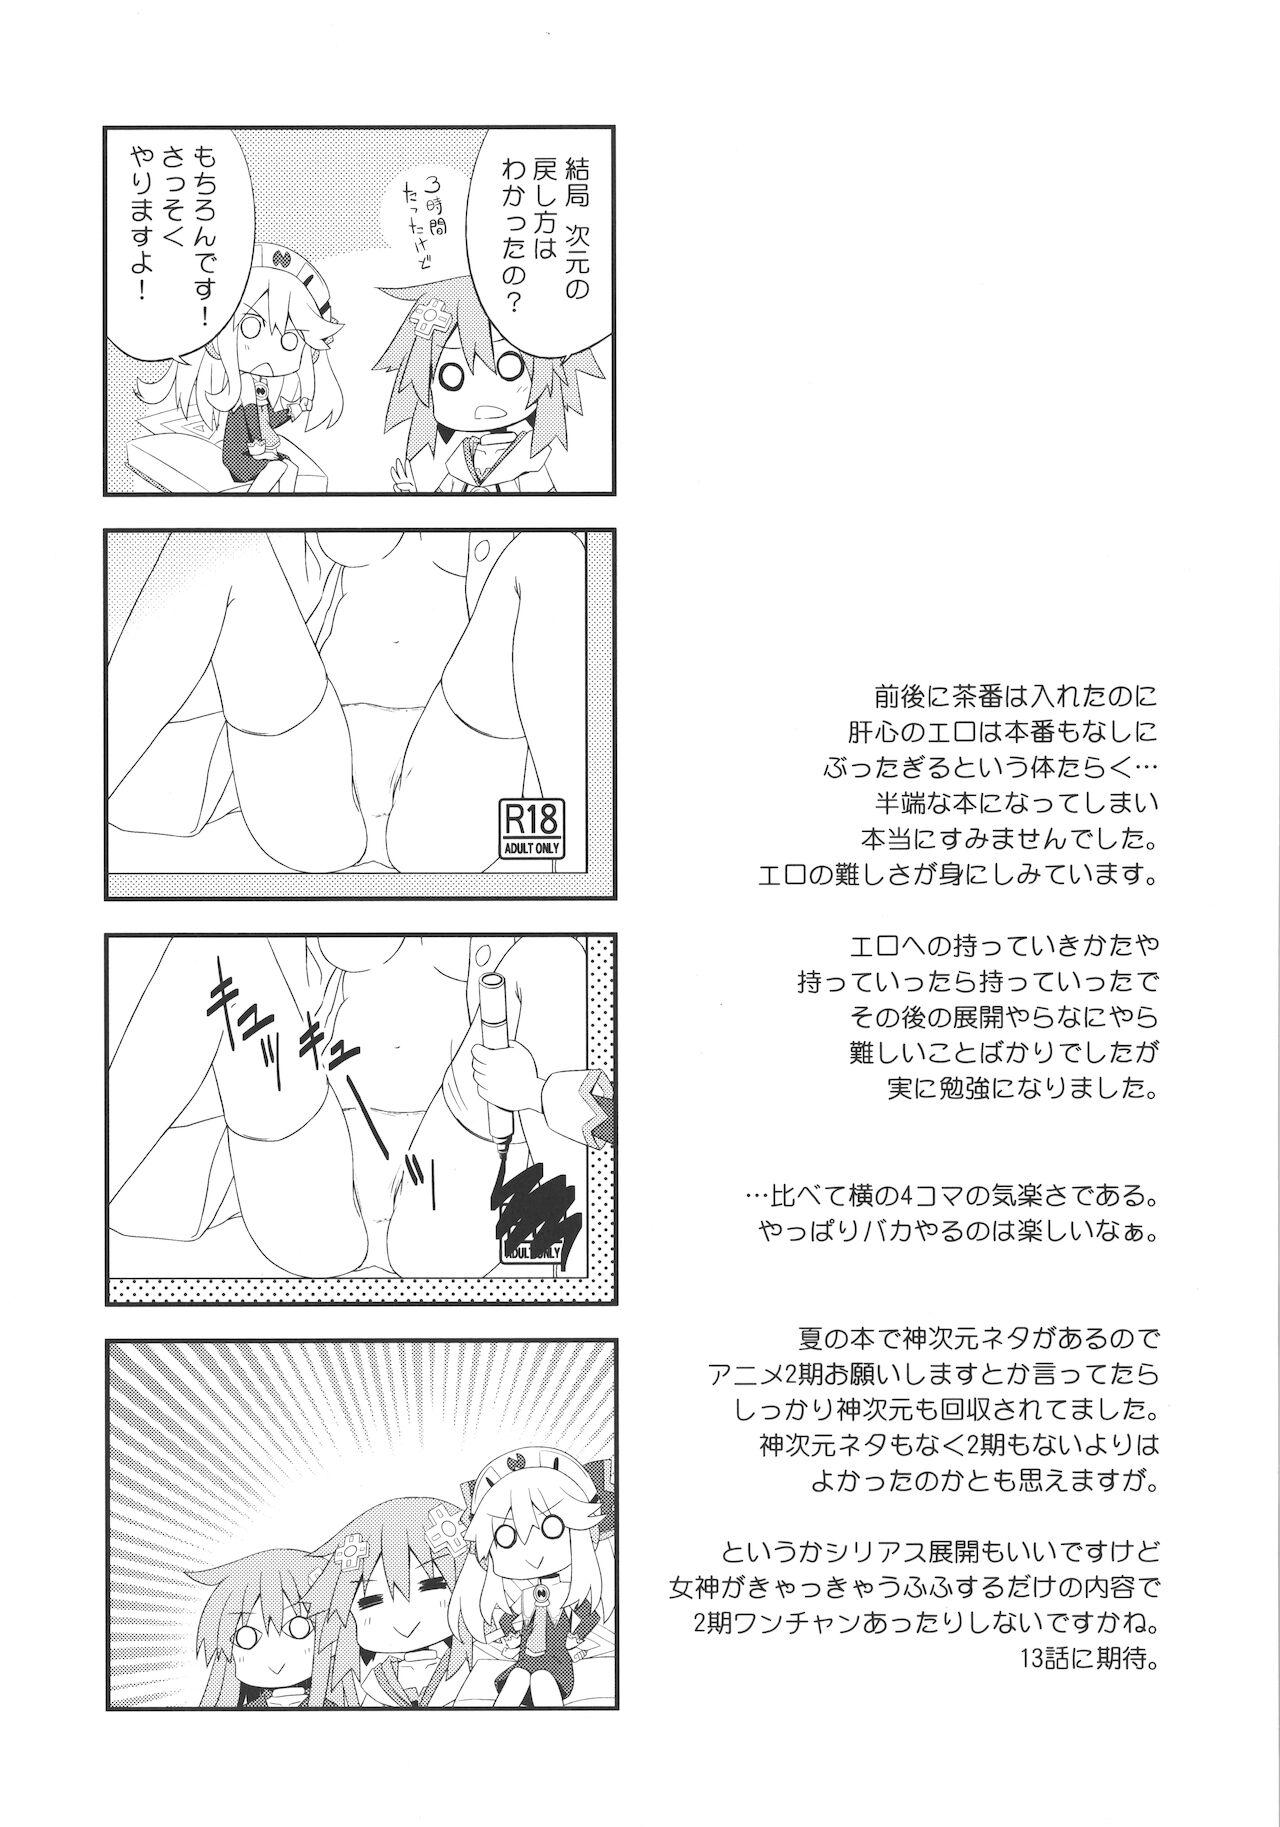 A certain Nepgear was harmed in the making of this doujinshi 16